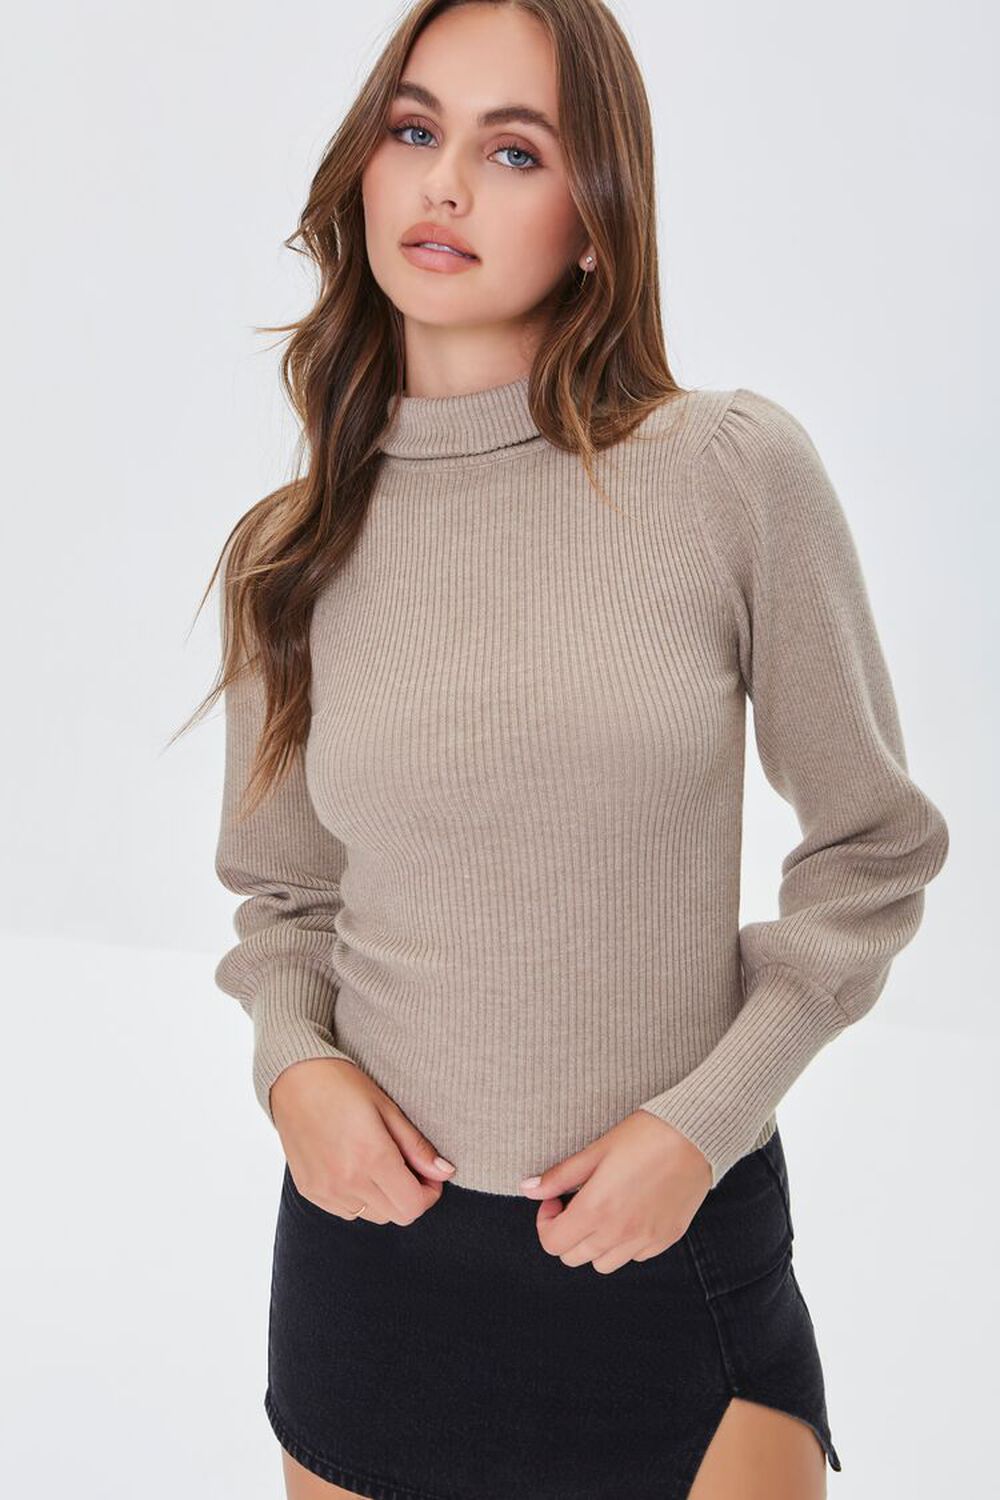 TAUPE Ribbed Turtleneck Sweater, image 1